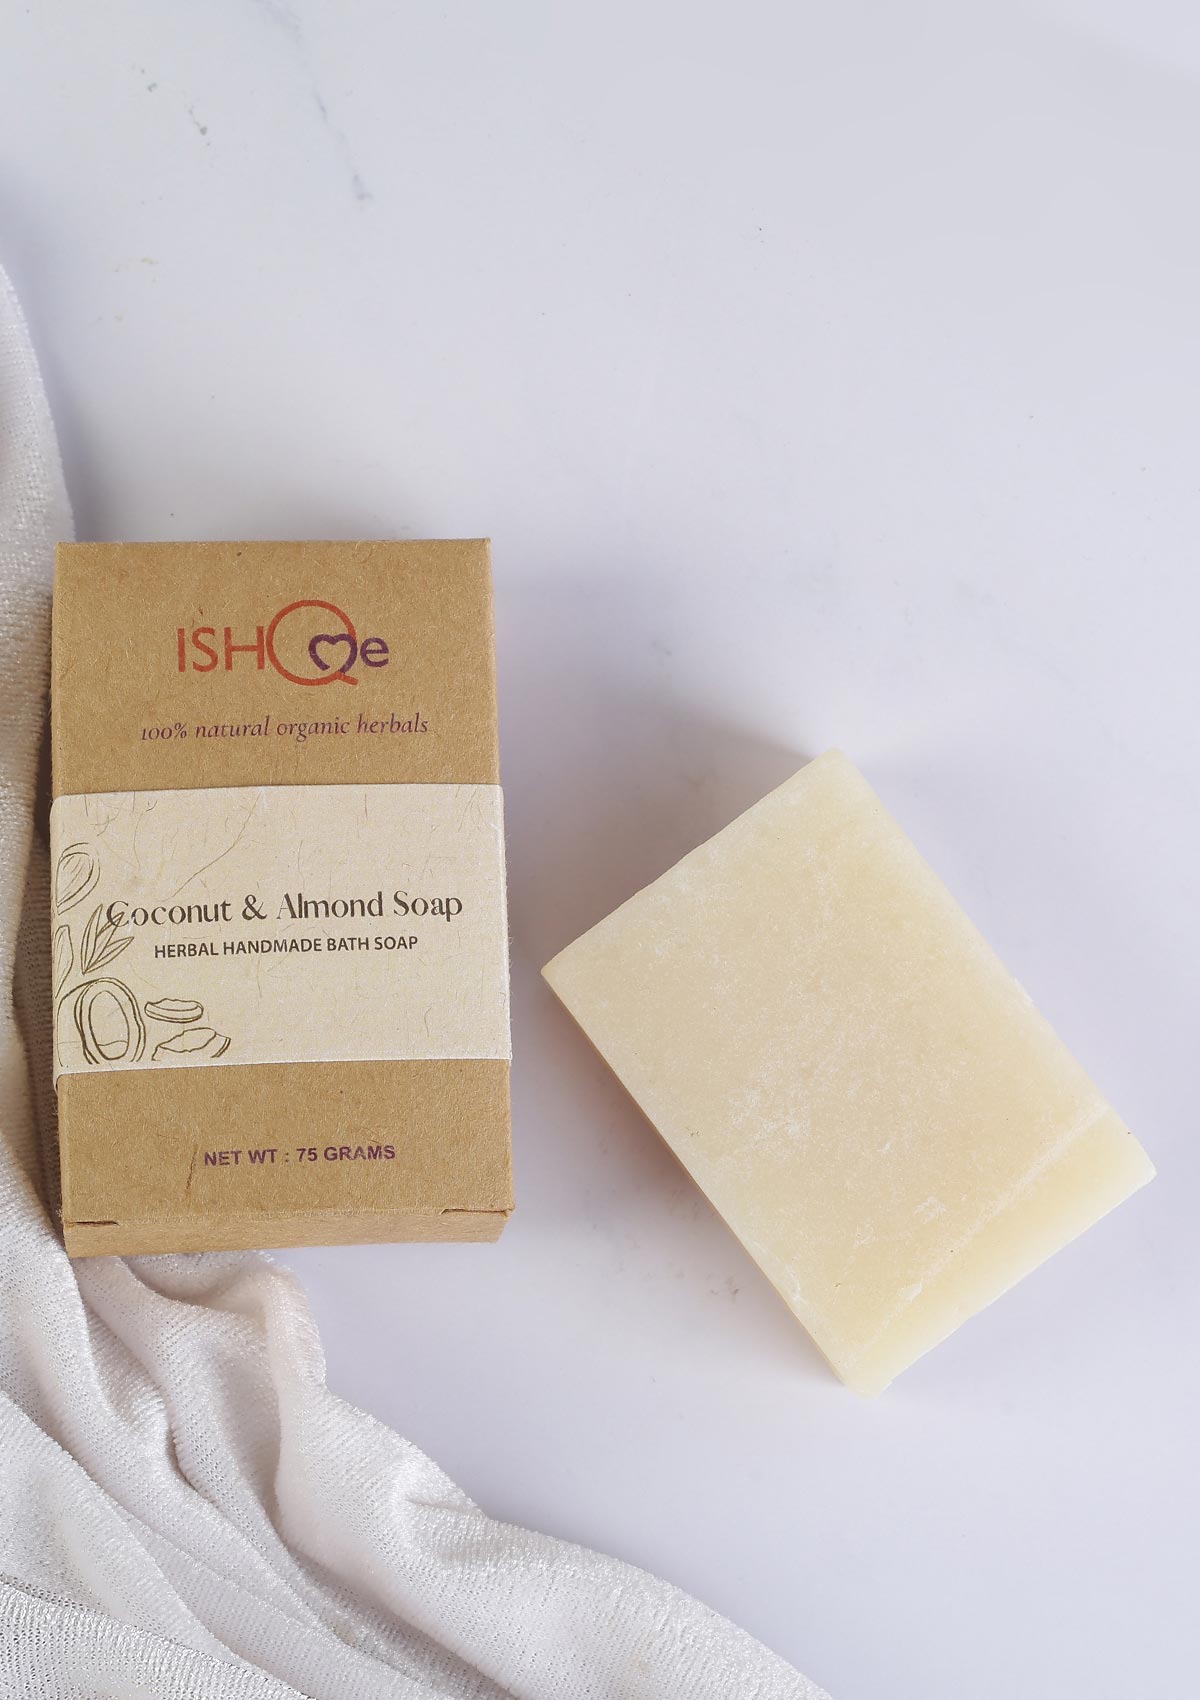 Lavender and Coconut & Almond Soap with Soap dish - IshqMe